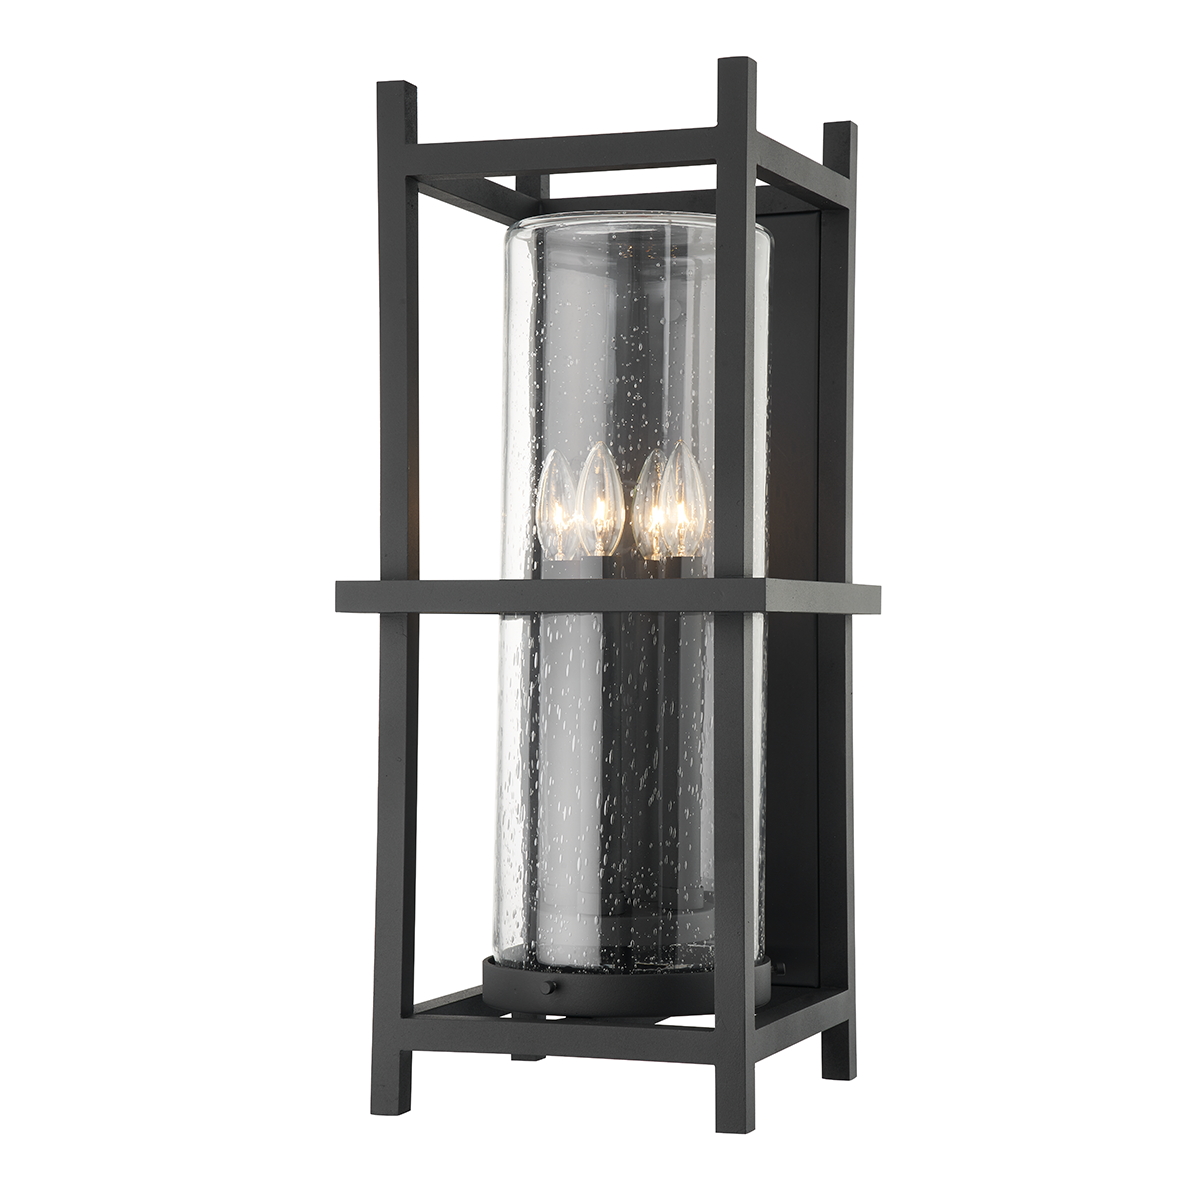 Troy Lighting 4 LIGHT LARGE EXTERIOR WALL SCONCE B7504